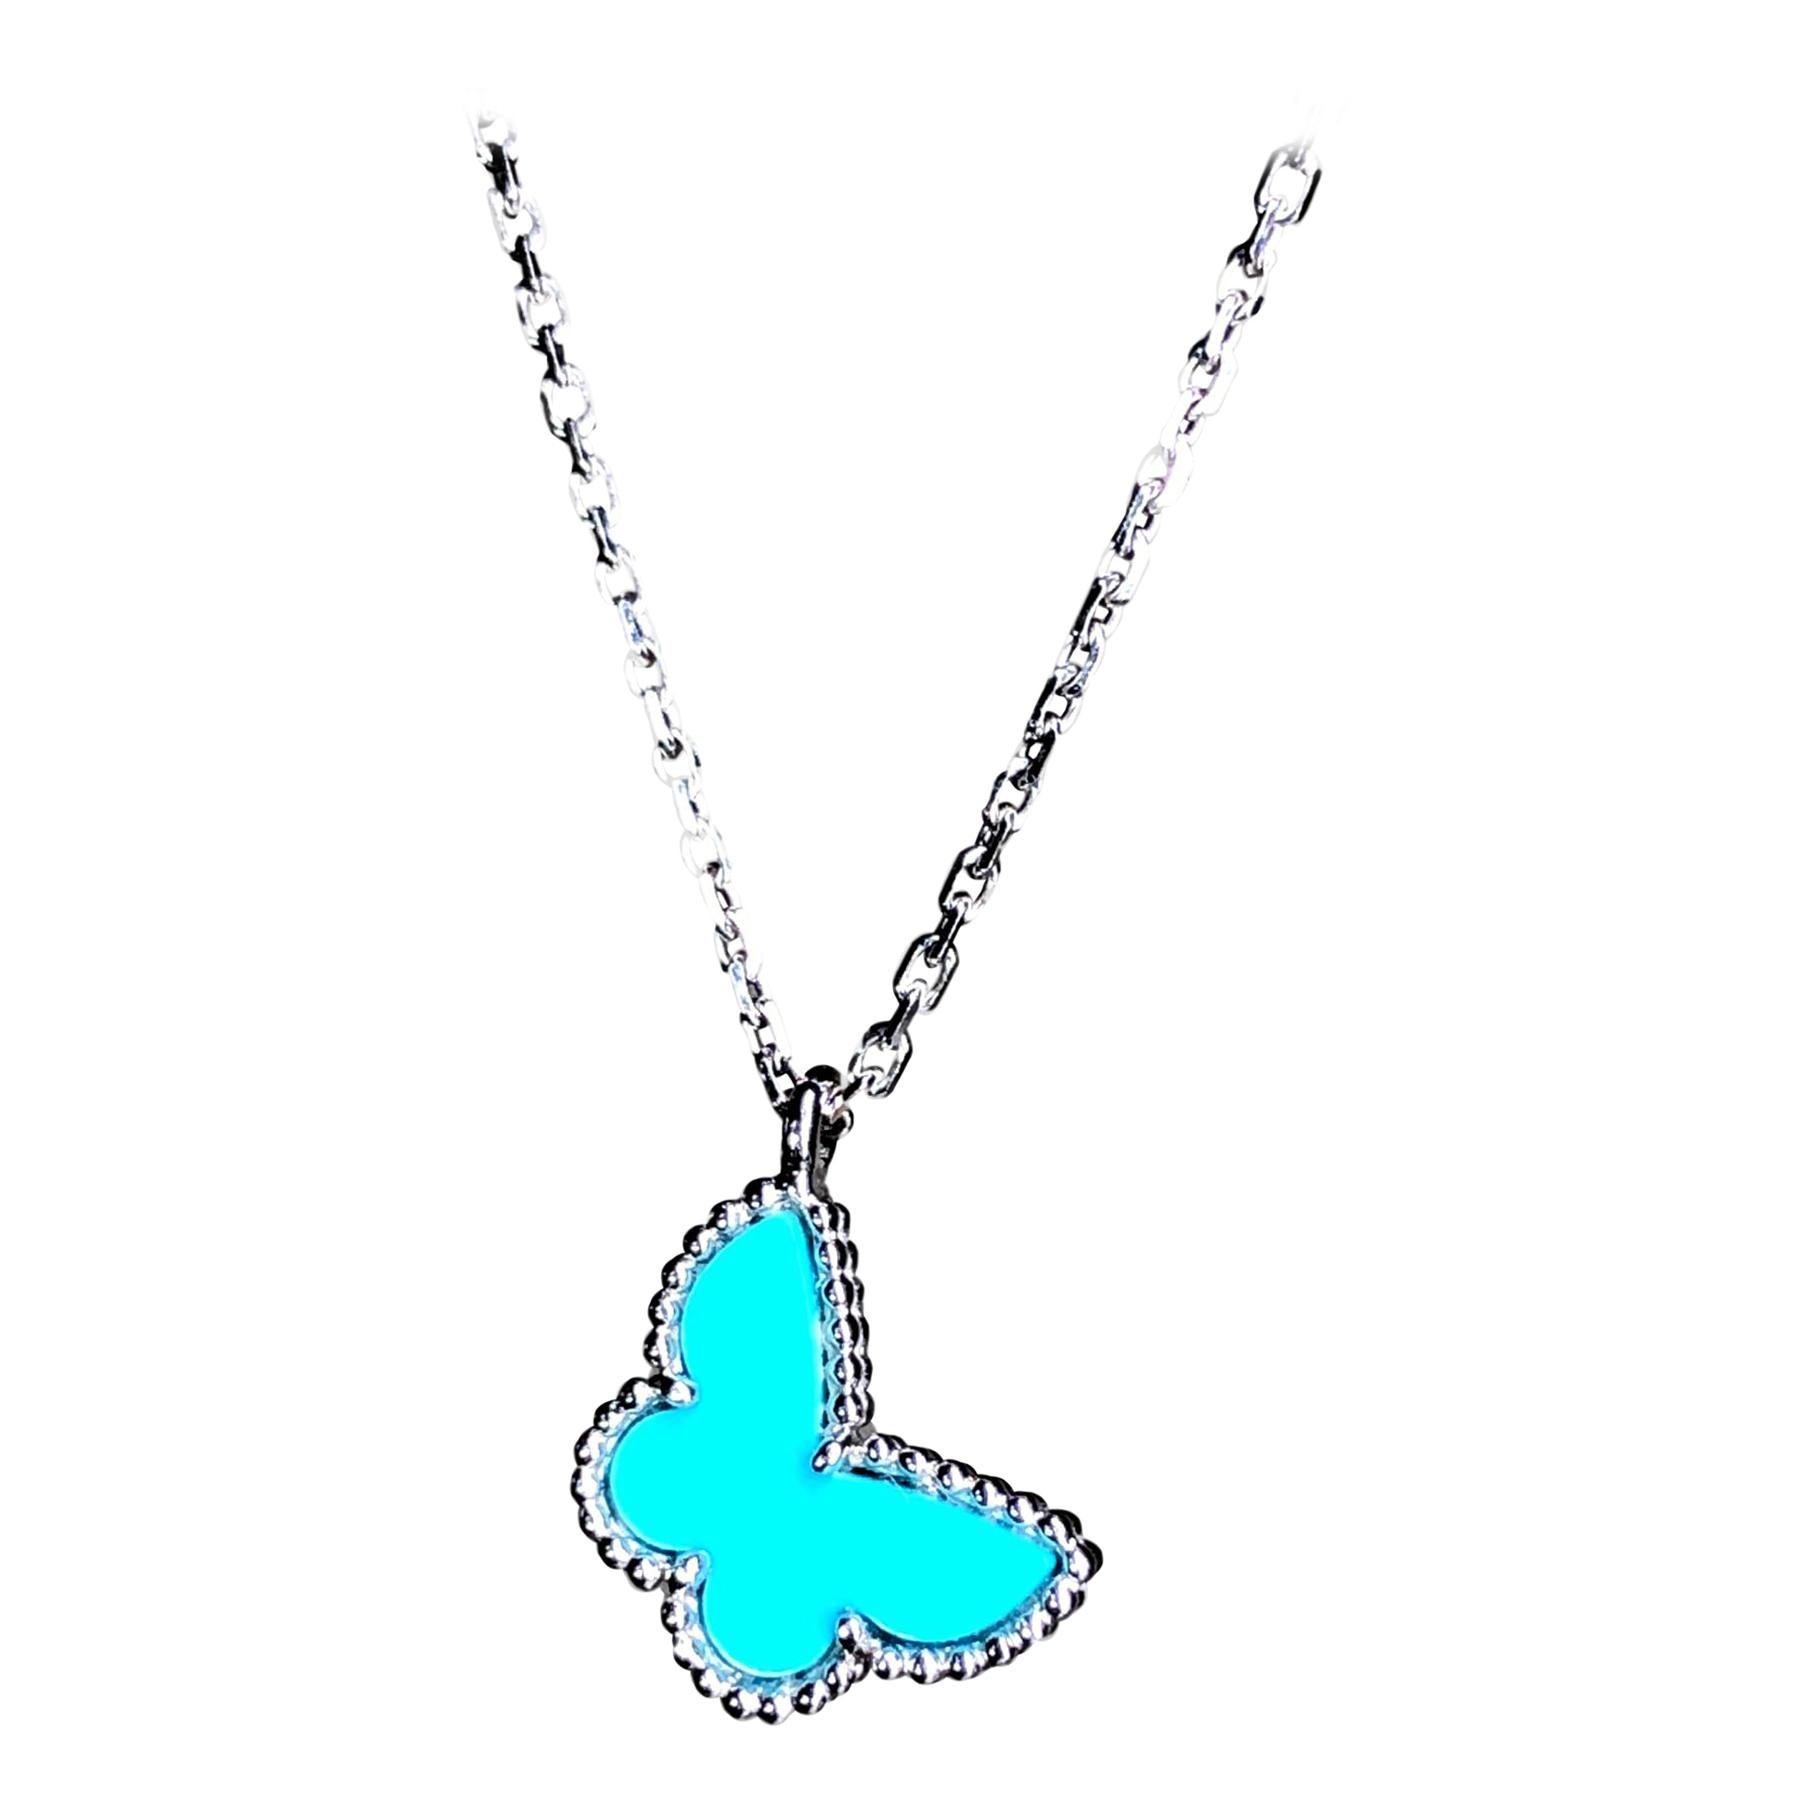 Van Cleef & Arpels Sweet Alhambra 18k White Gold Turquoise Pendant Necklace